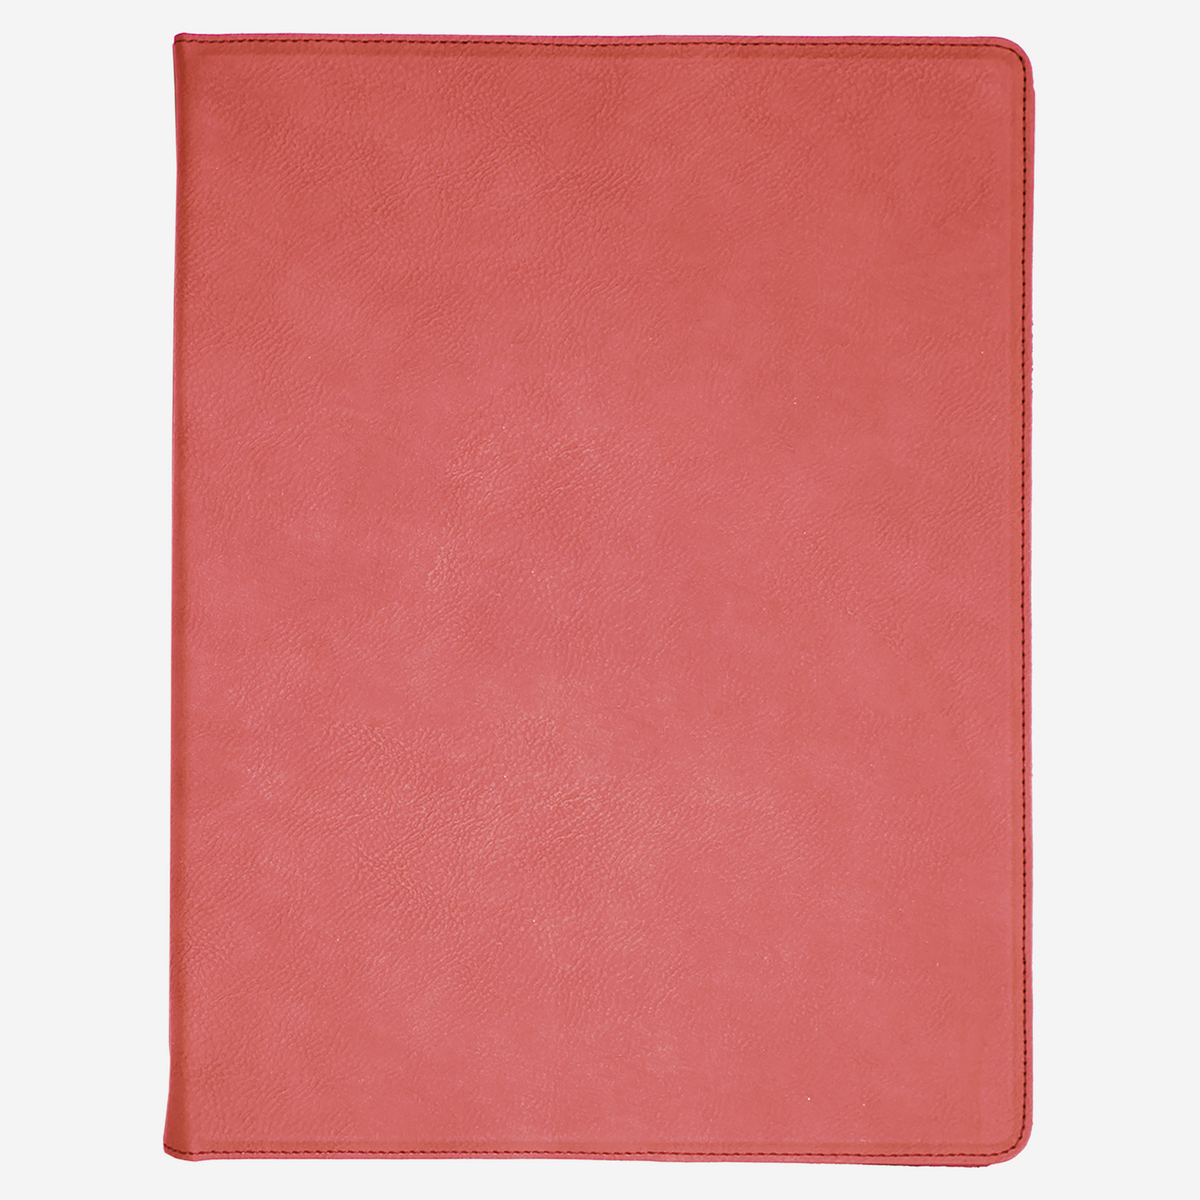 Pale Violet Red 9 1/2" x 12" Laserable Leatherette Portfolio with Notepad